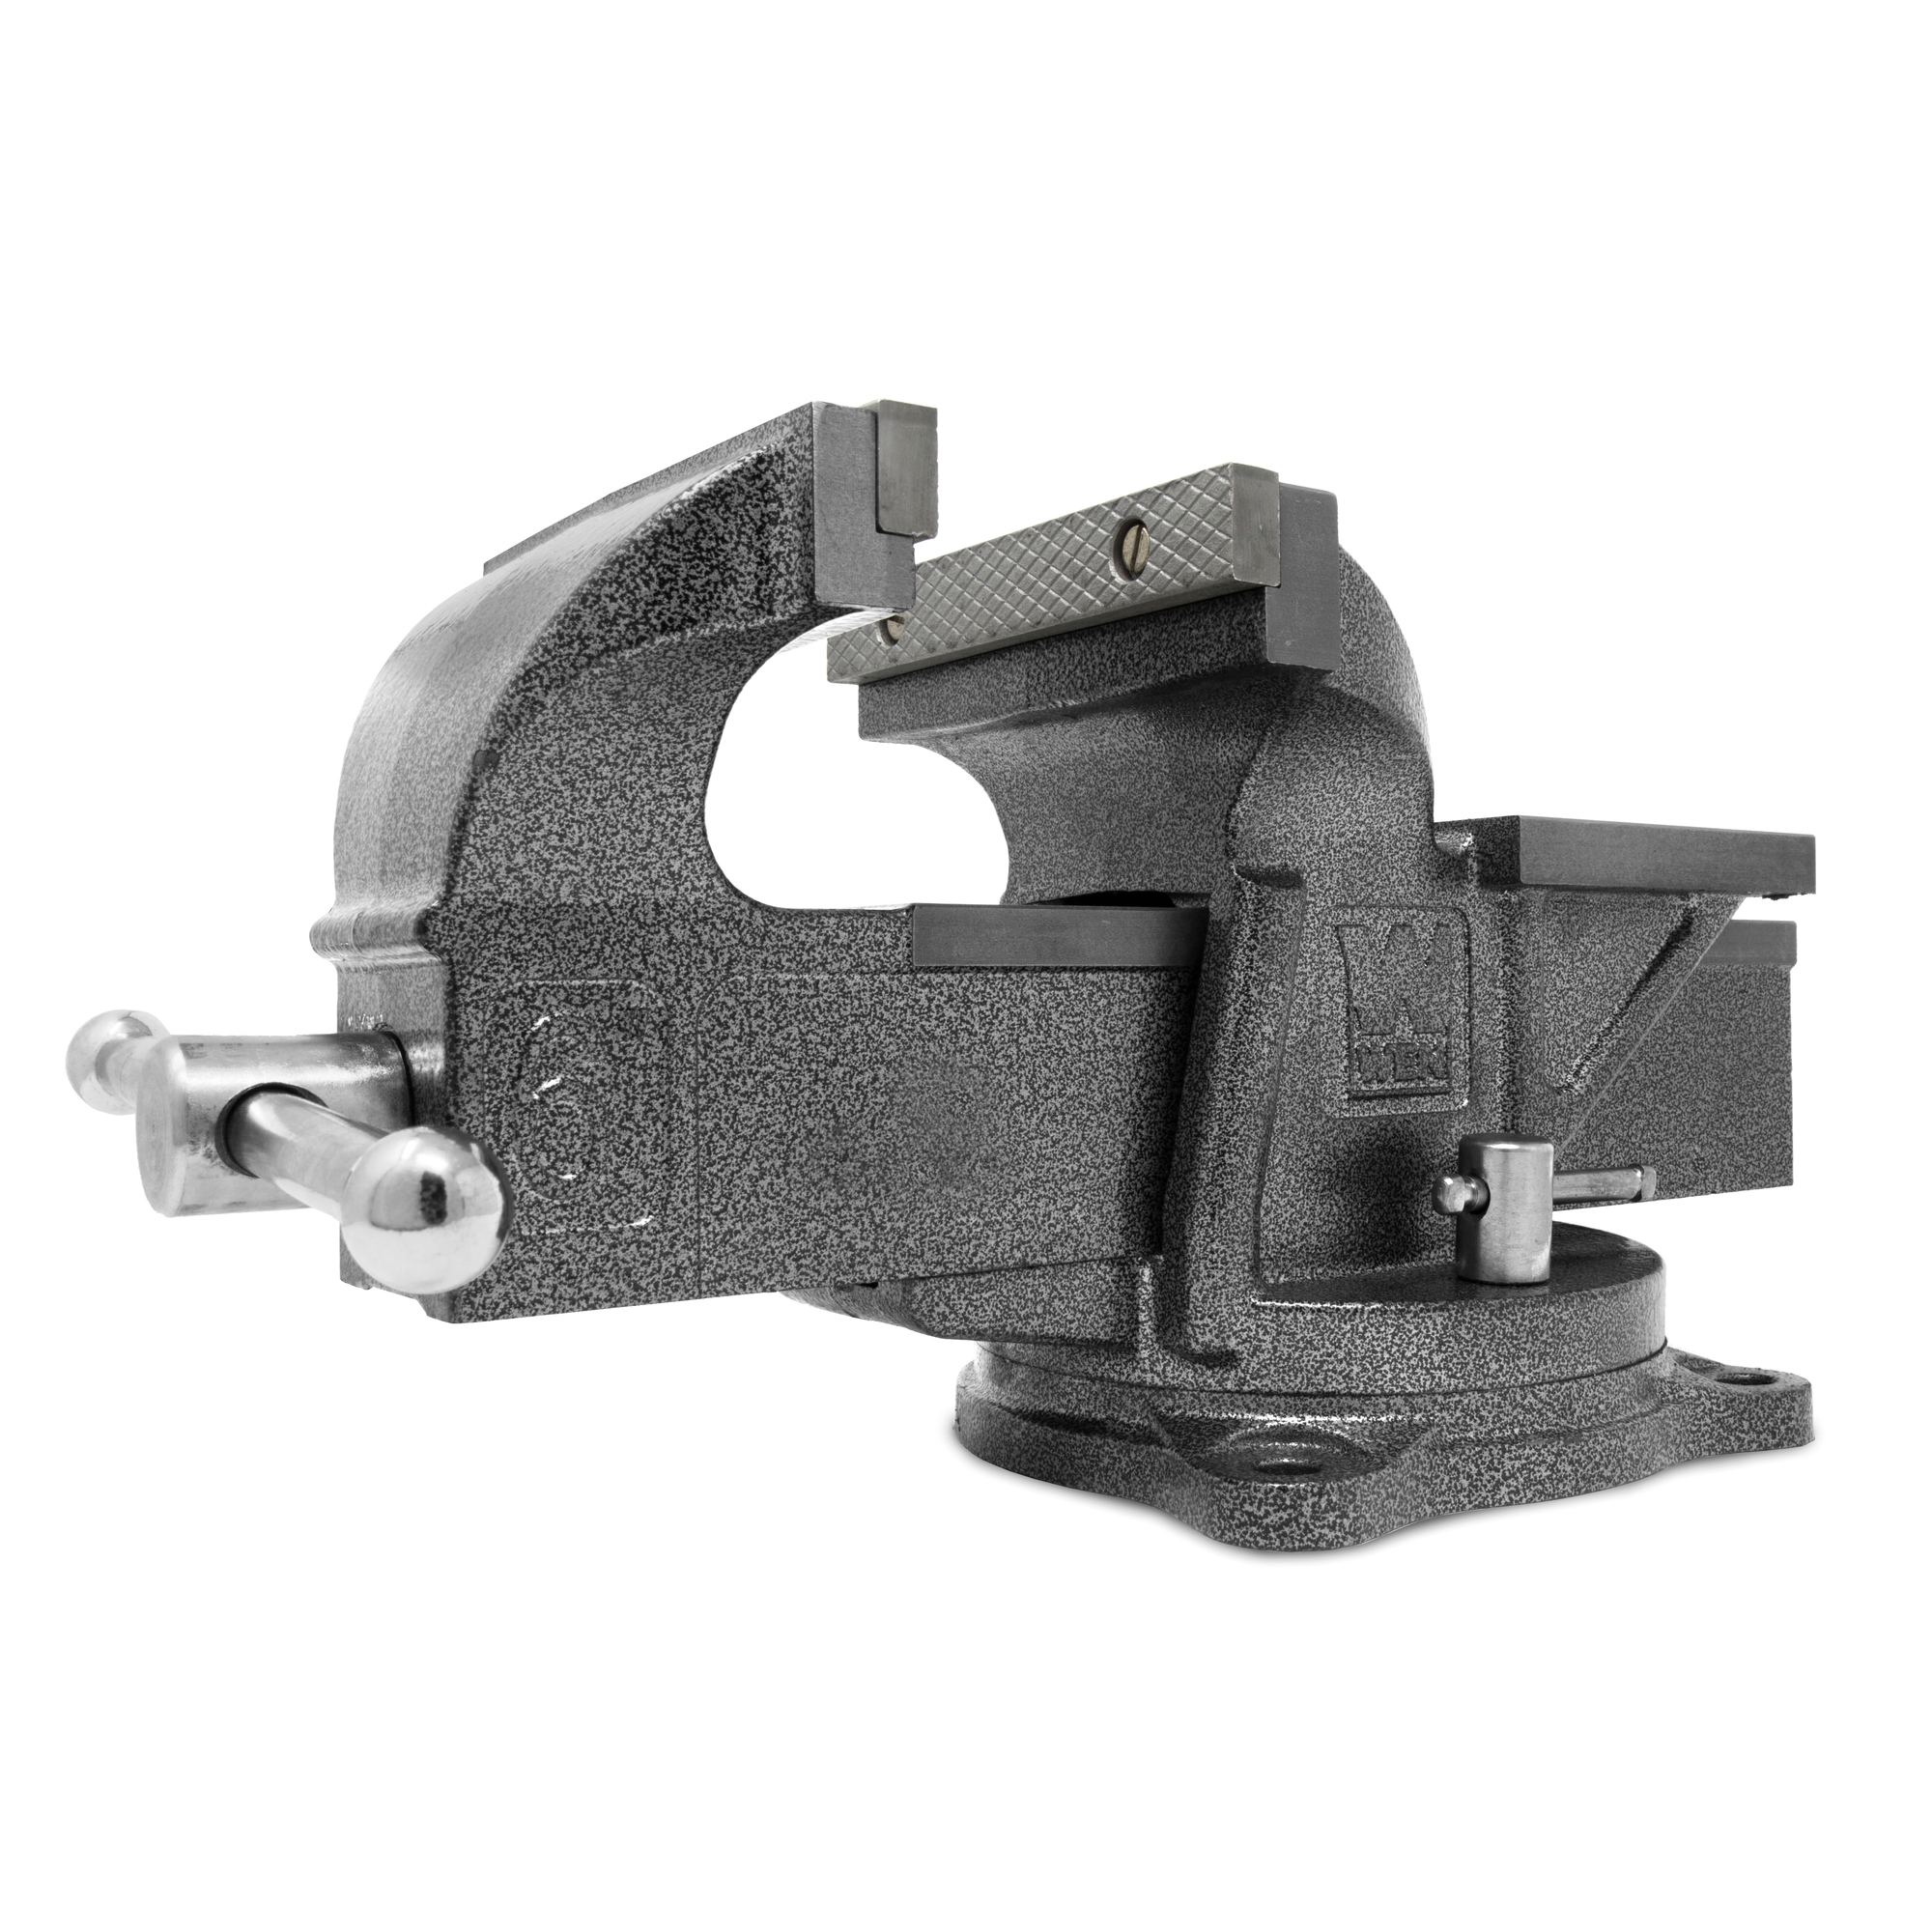 WEN, 6Inch Cast Iron Bench Vise with Swivel Base, Jaw Width 6 in, Jaw Capacity 6.63 in, Material Cast Iron, Model BV456